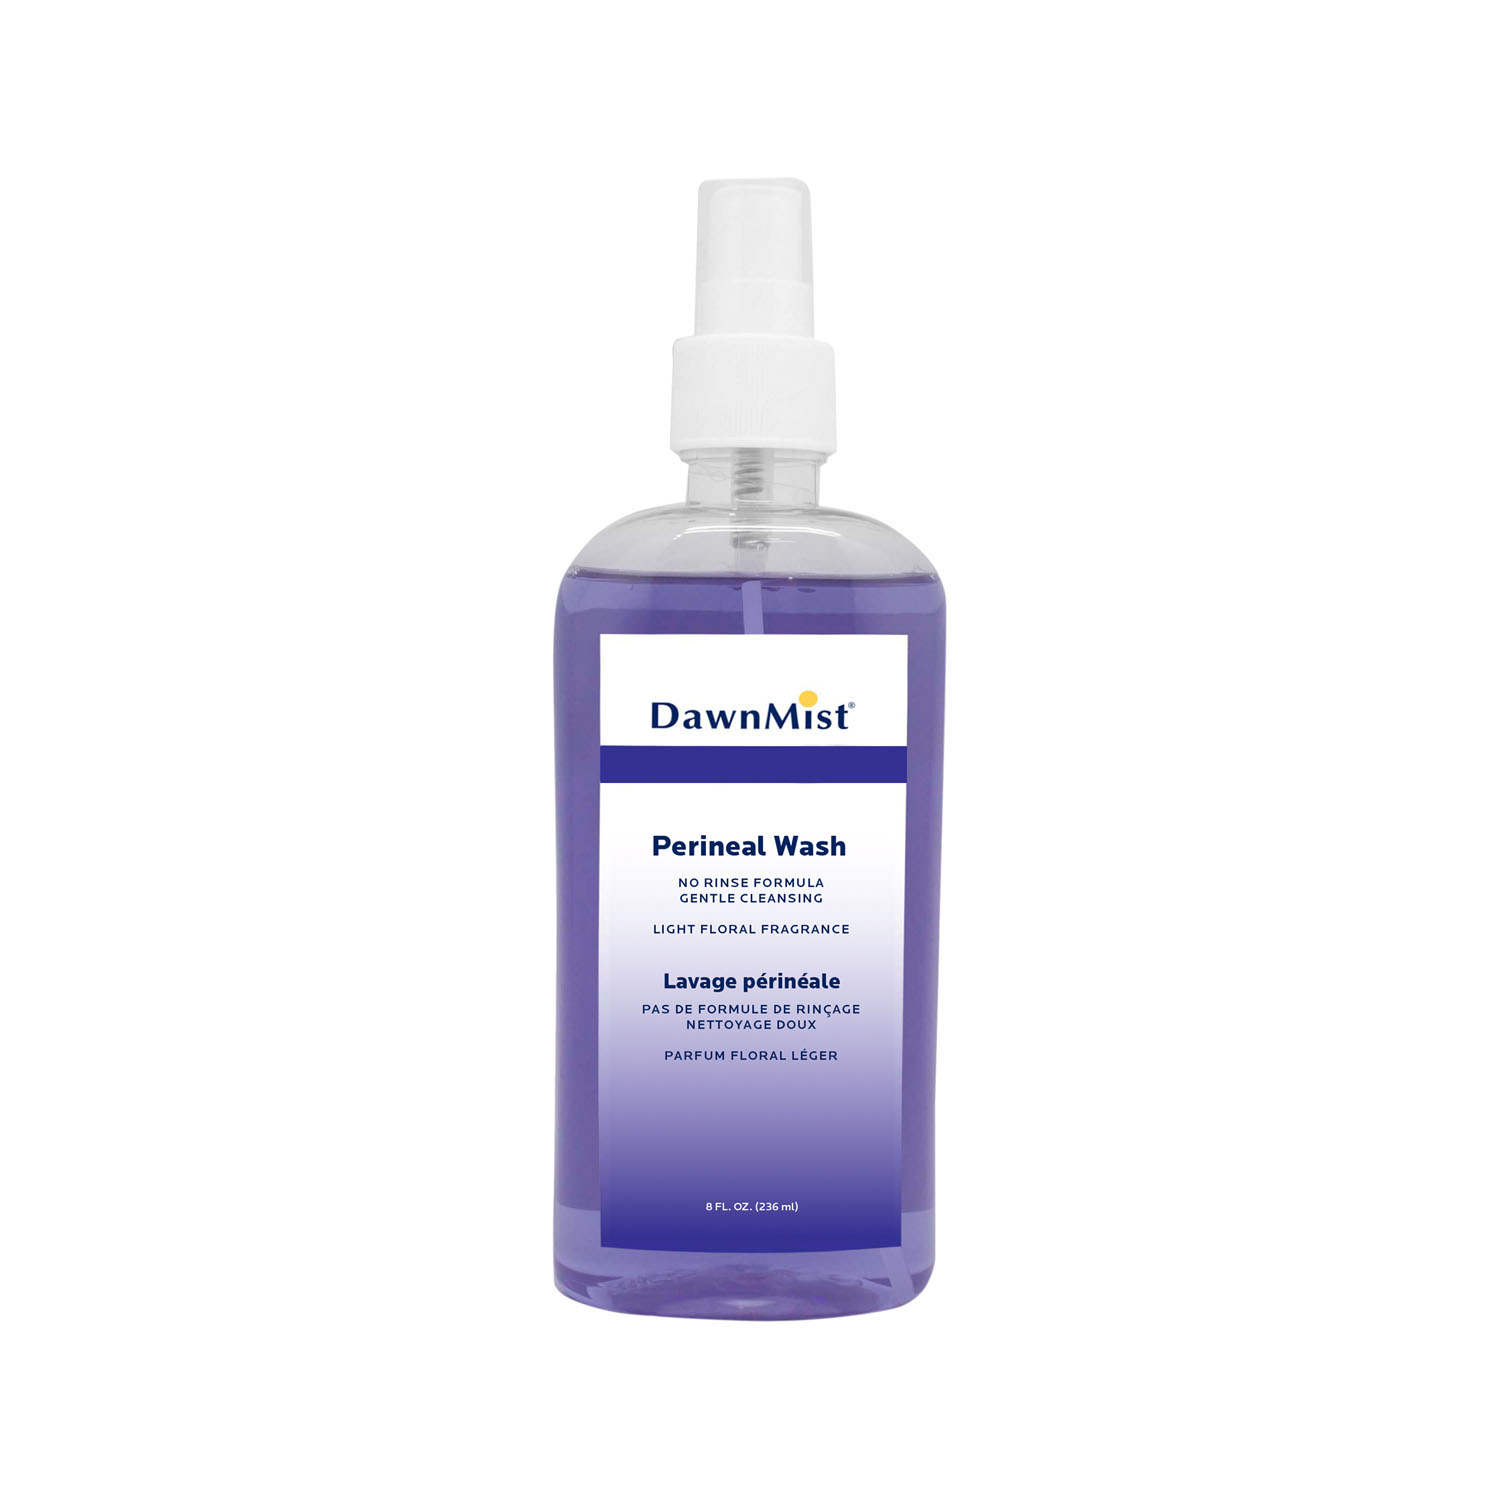 DUKAL DAWNMIST PERINEAL WASH : PW5194 EA $1.82 Stocked